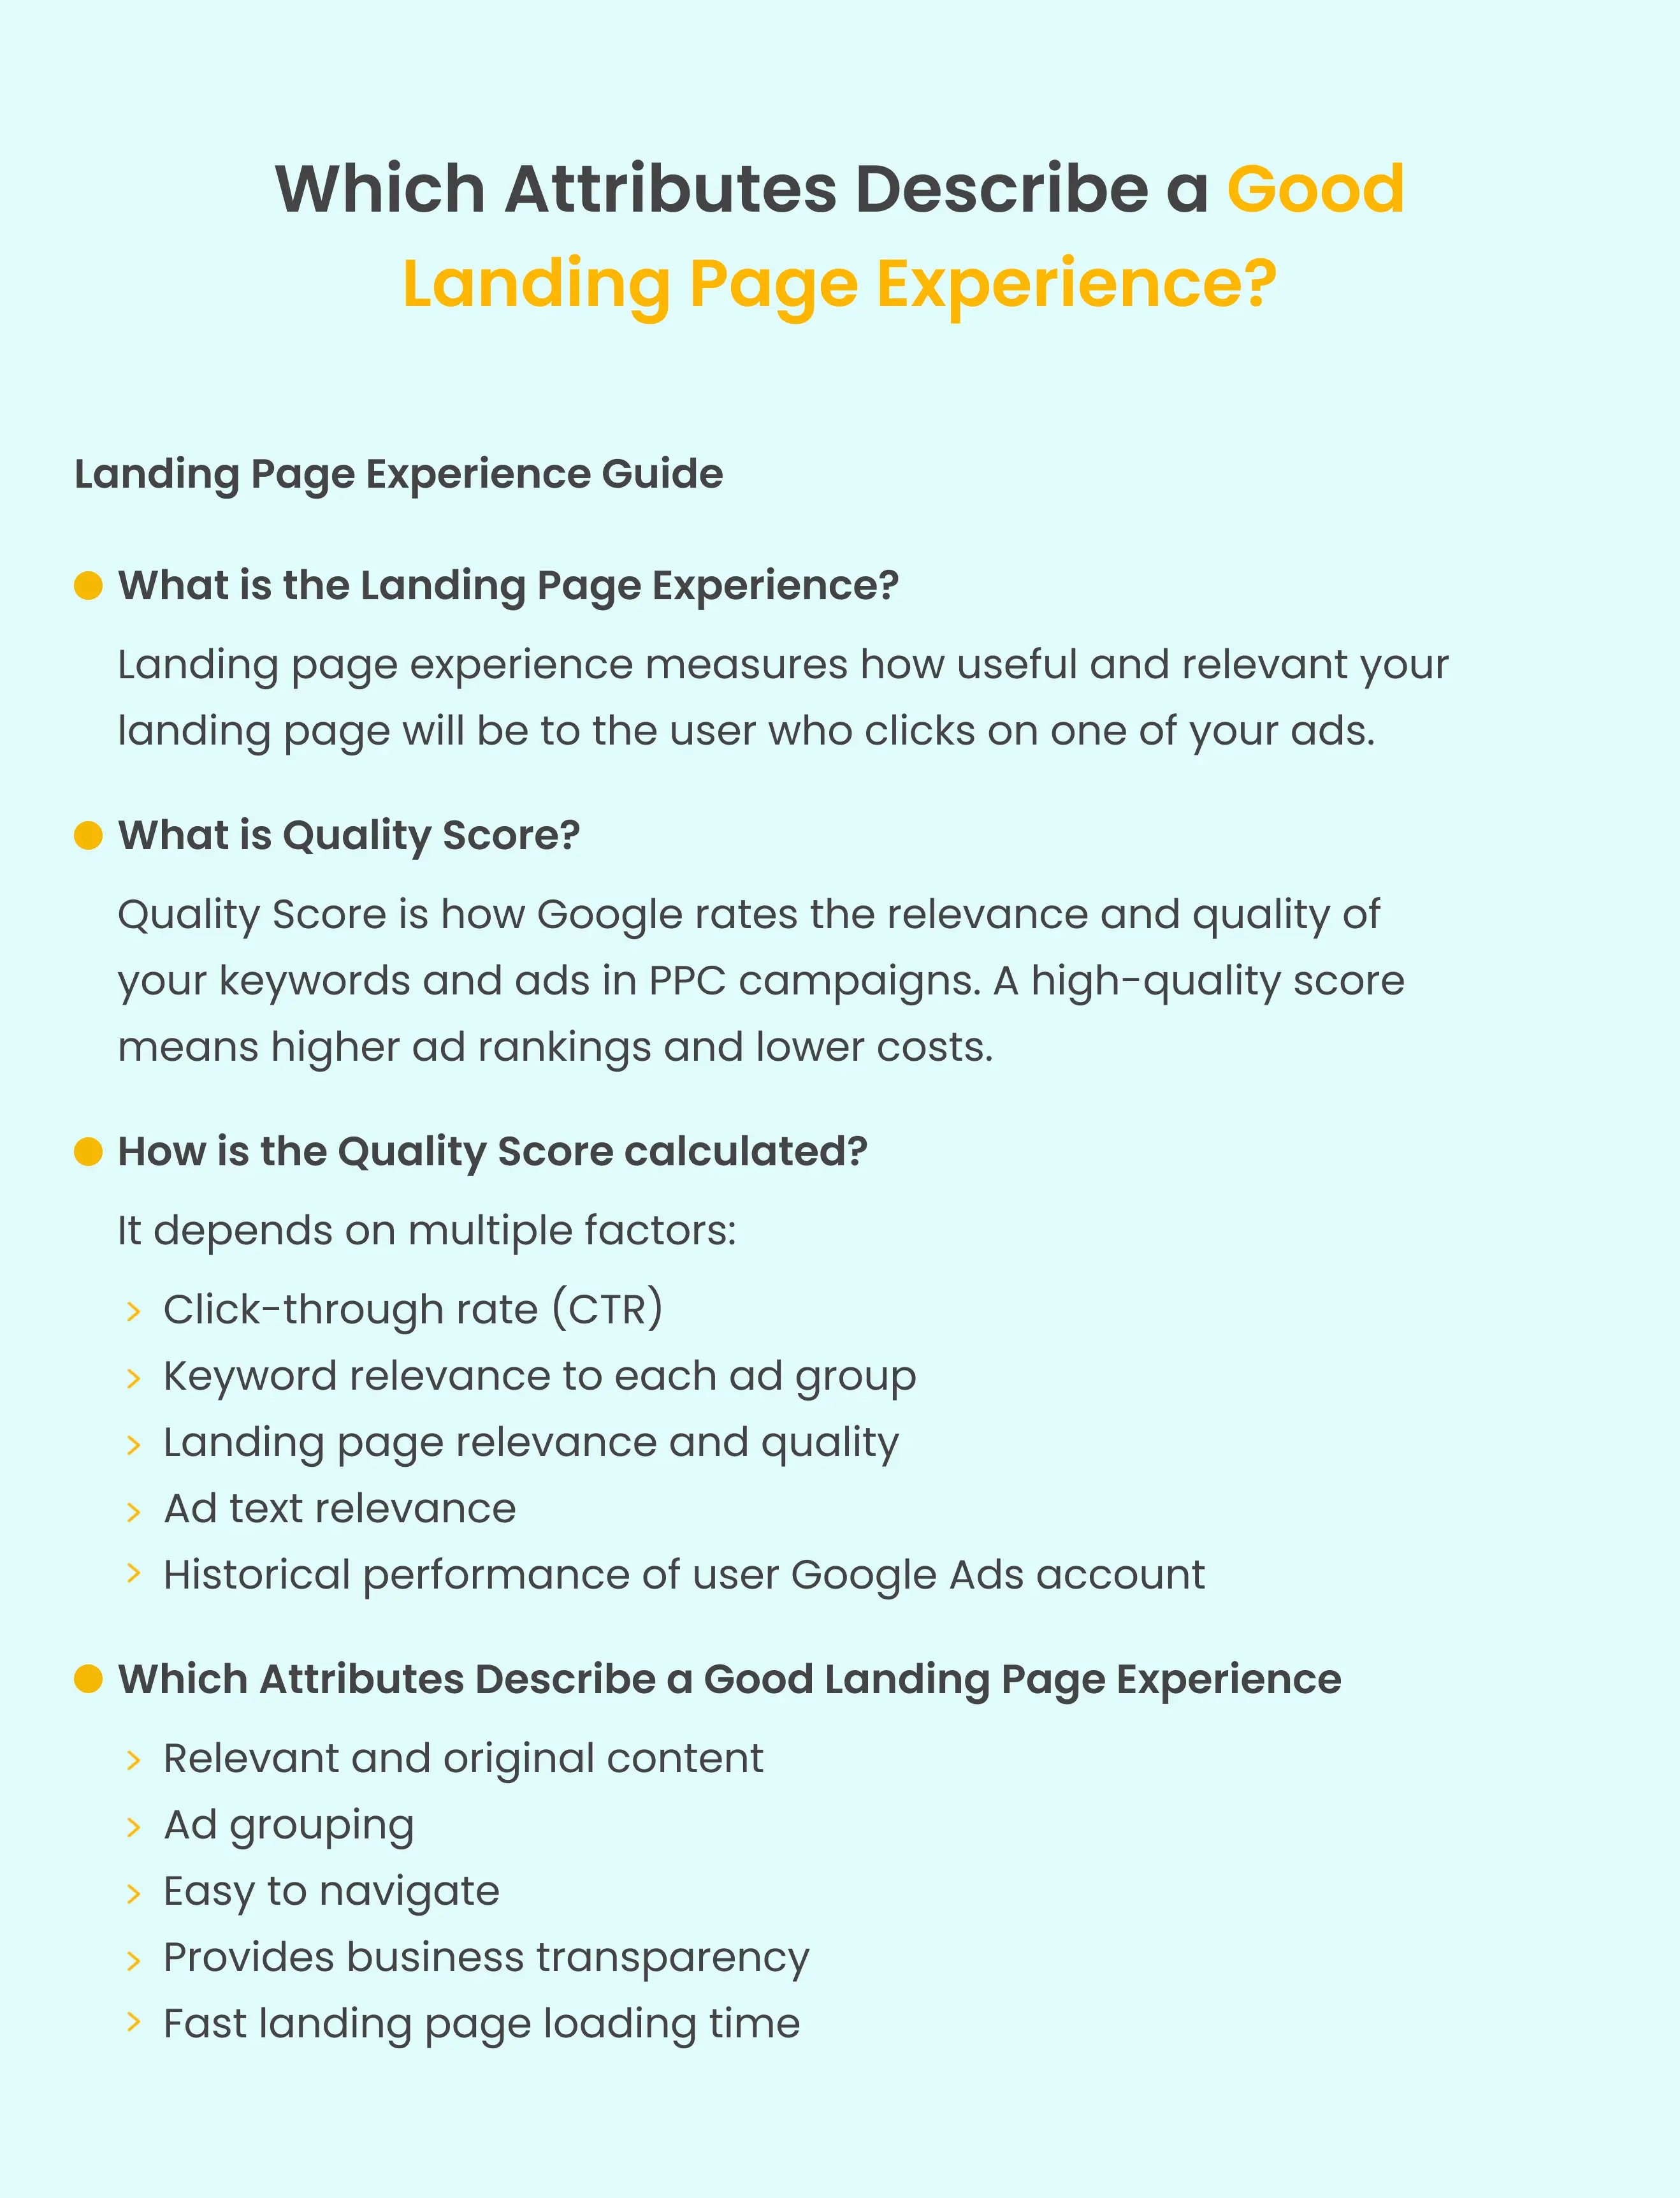 which-attributes-describe-a-good-landing-page-experience-summary-a14ae0.webp